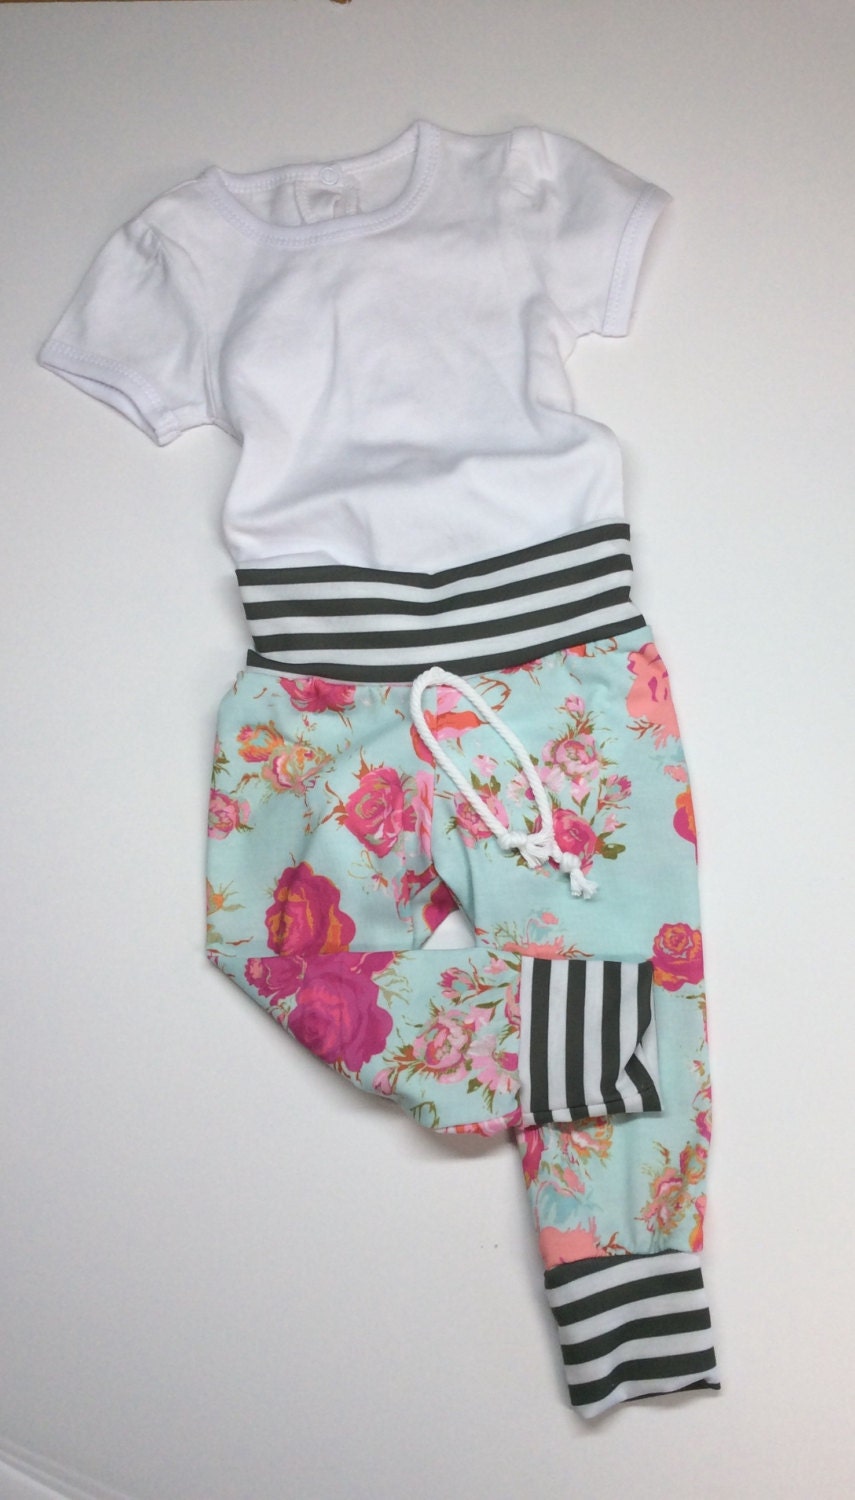 Organic baby clothes Newborn girl take home outfit by Peekarookid